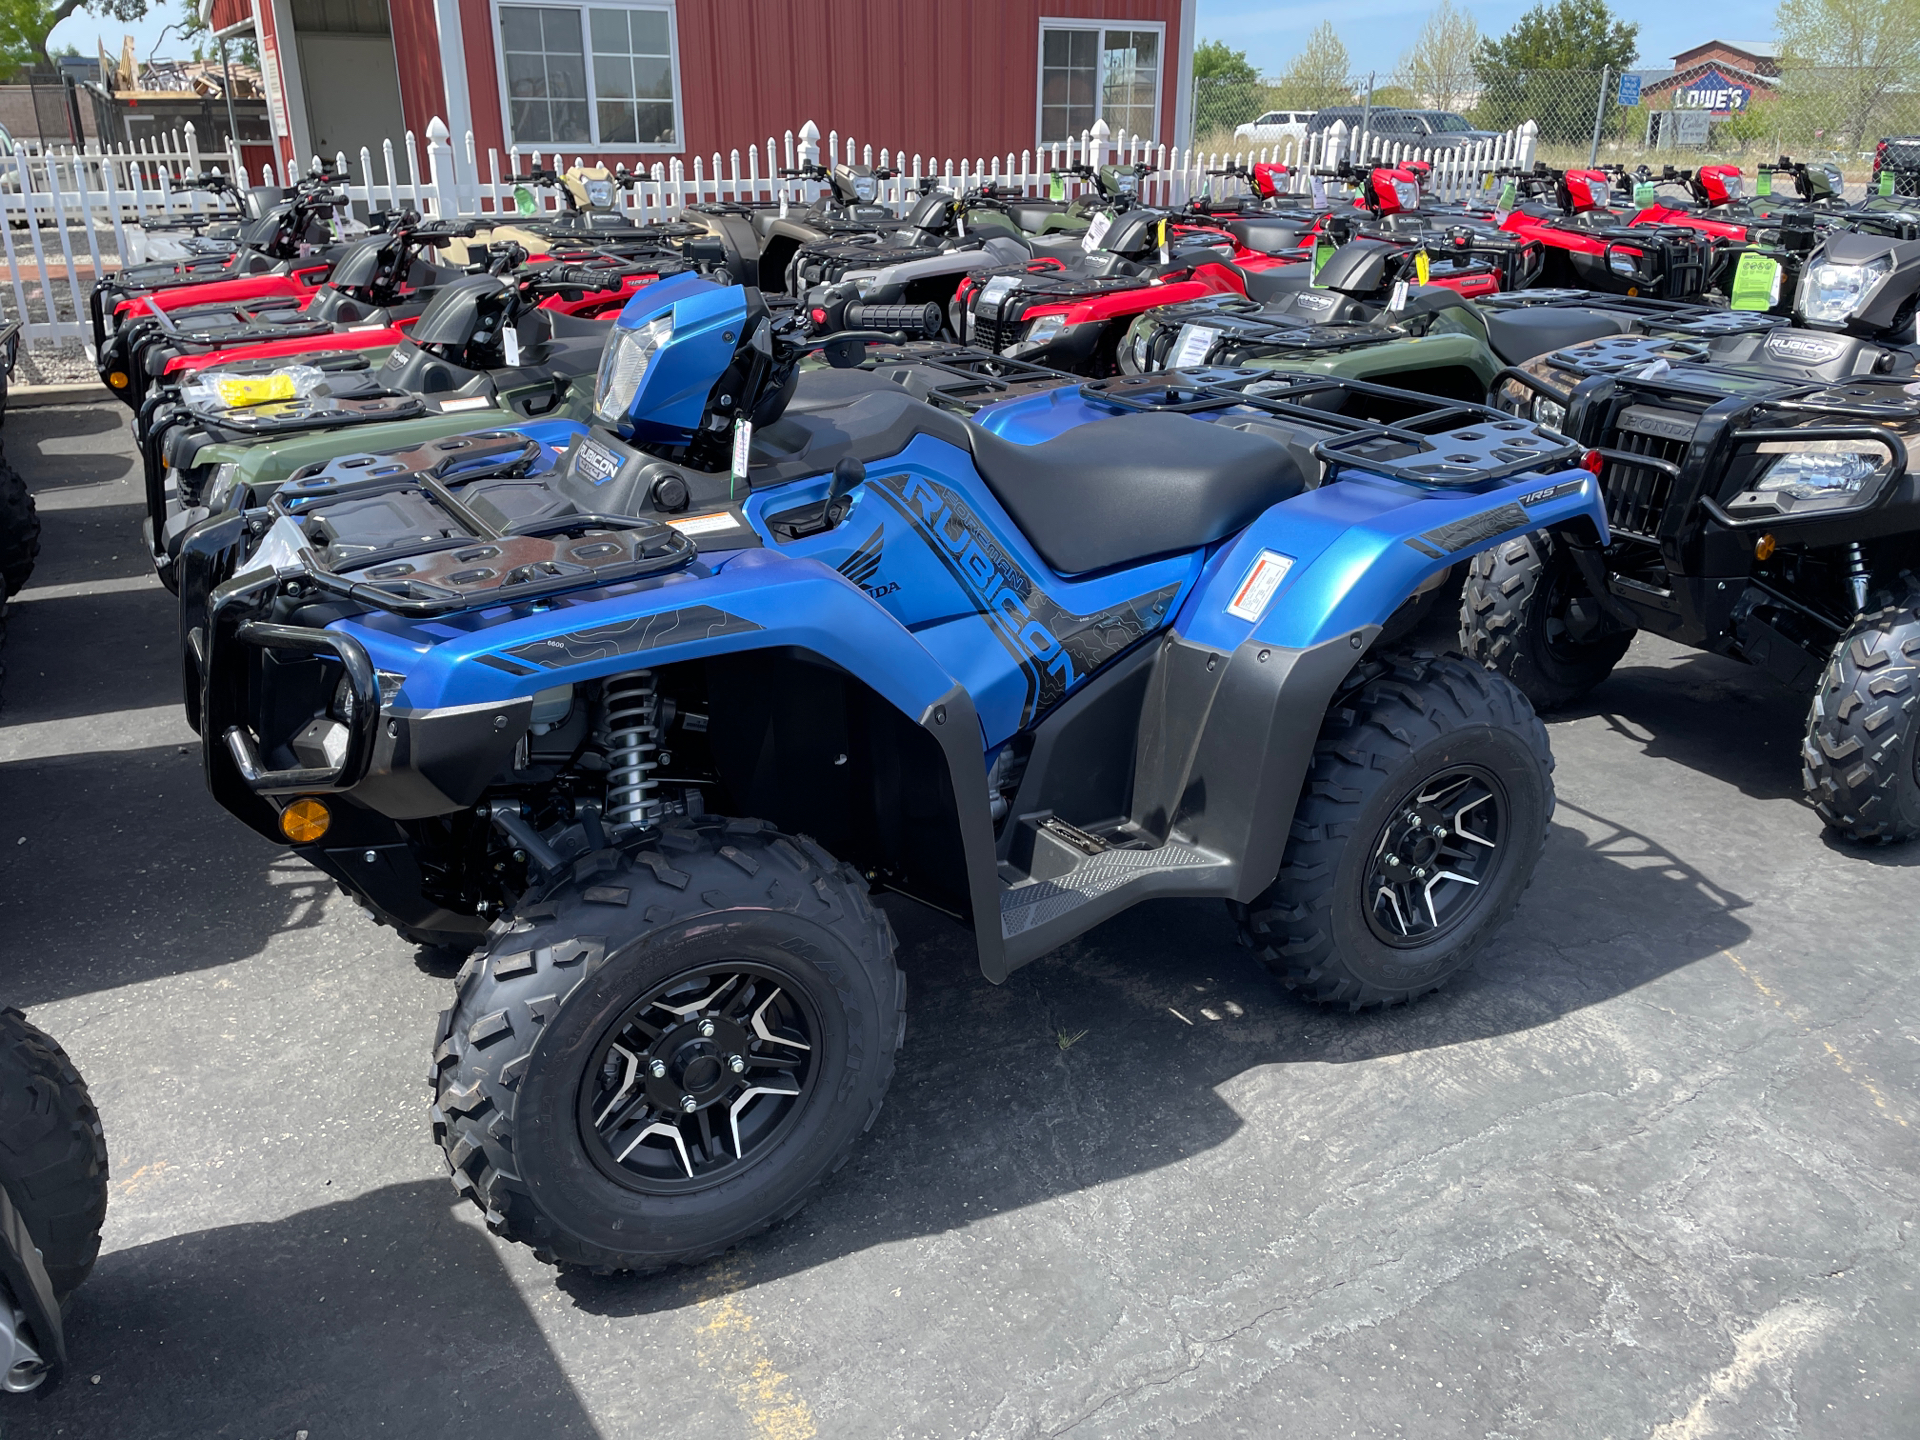 2022 Honda FourTrax Foreman Rubicon 4x4 Automatic DCT EPS Deluxe in Paso Robles, California - Photo 1